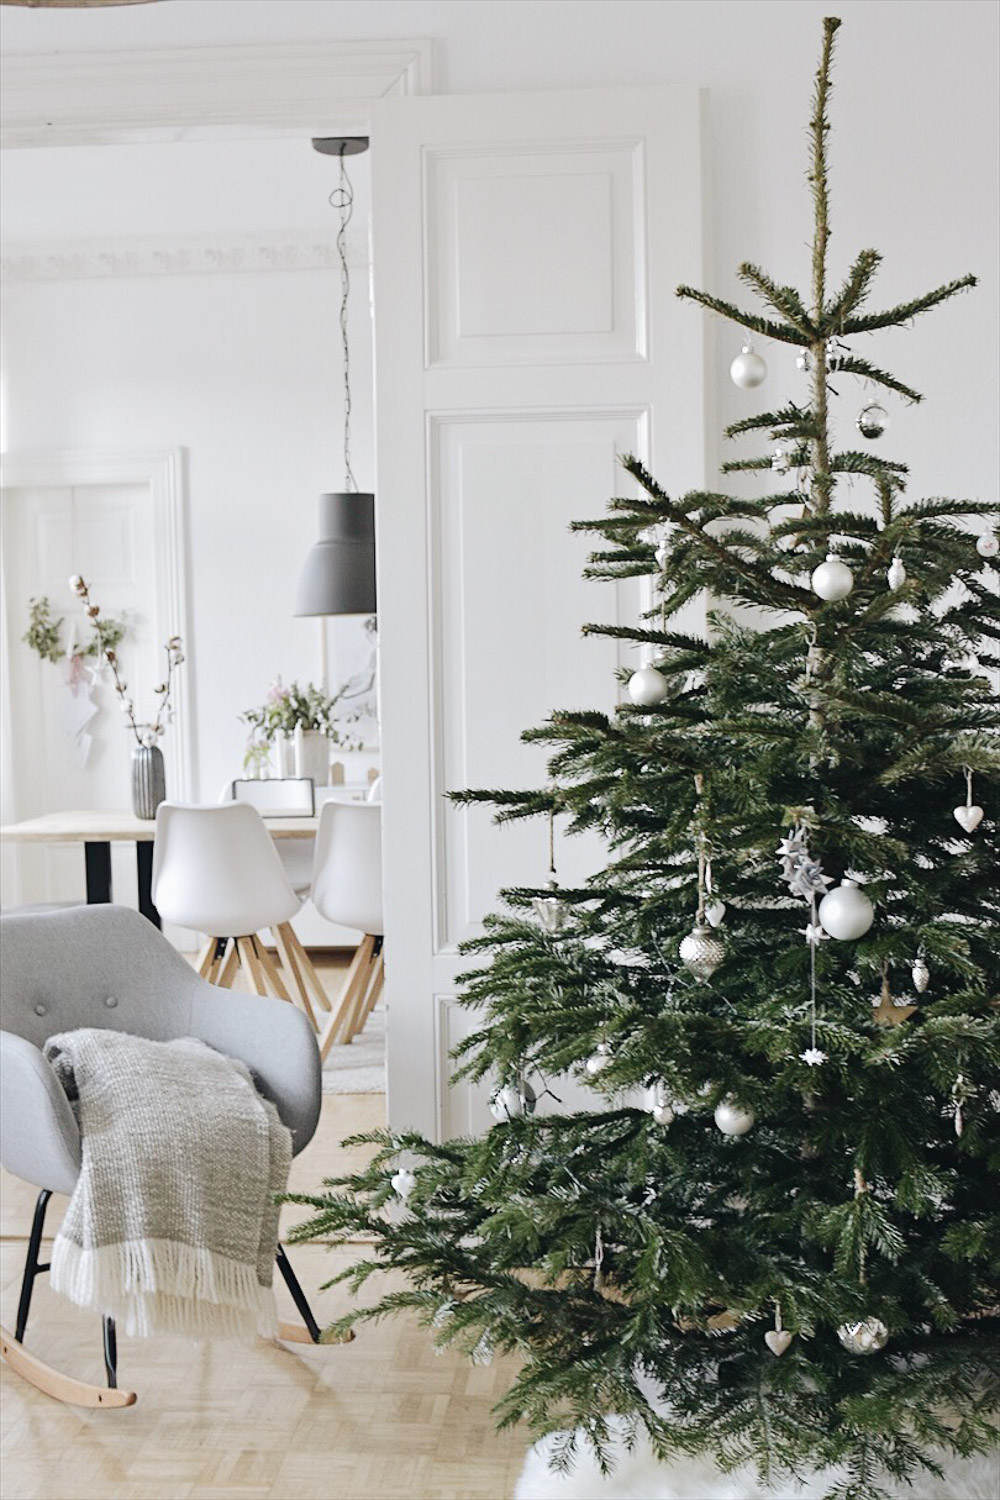 How to Decorate an Eco-Friendly Christmas Tree